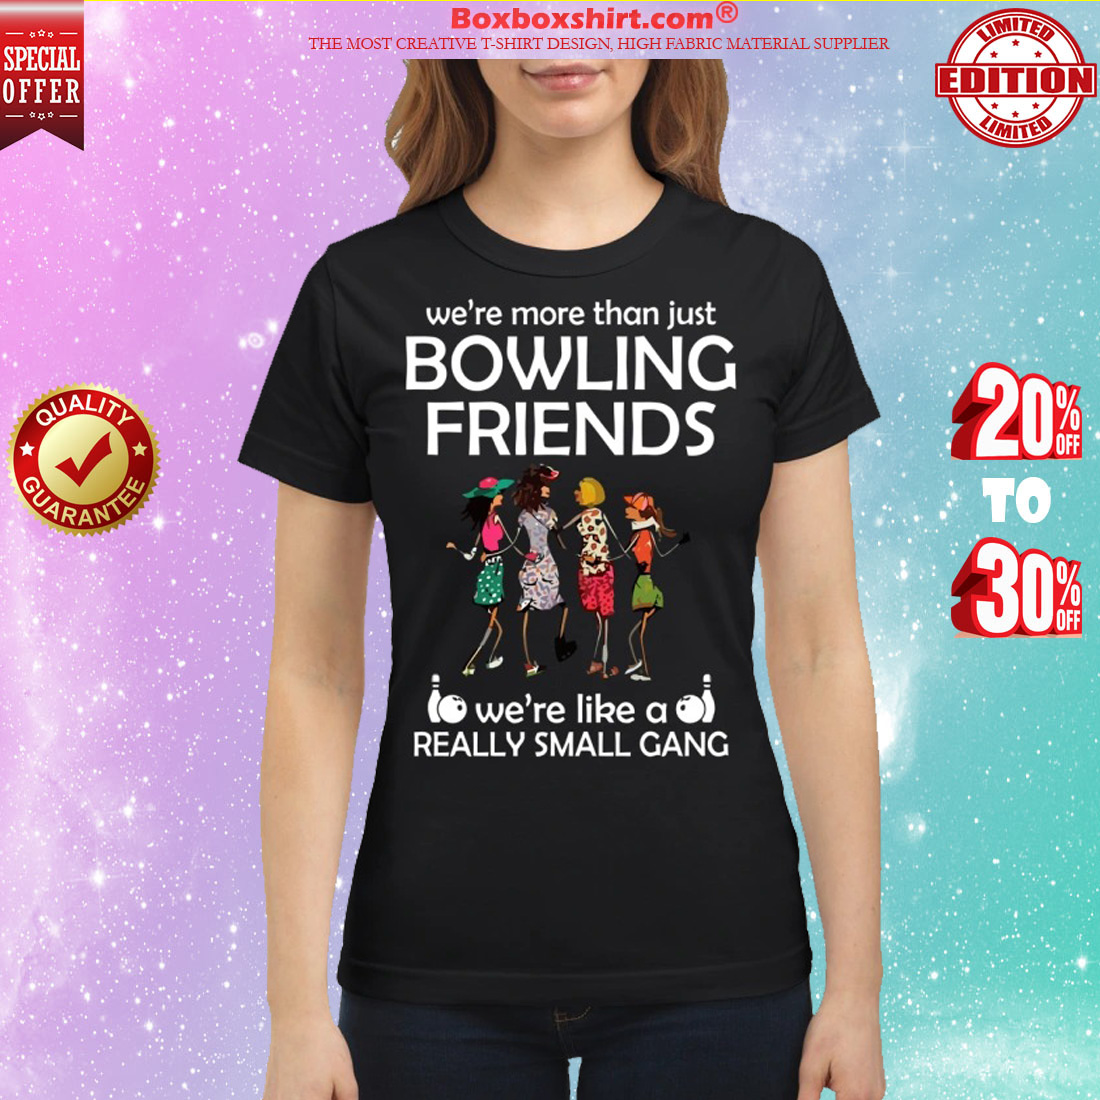 We are more than just bowling friends we're like a really small gang classic shirt